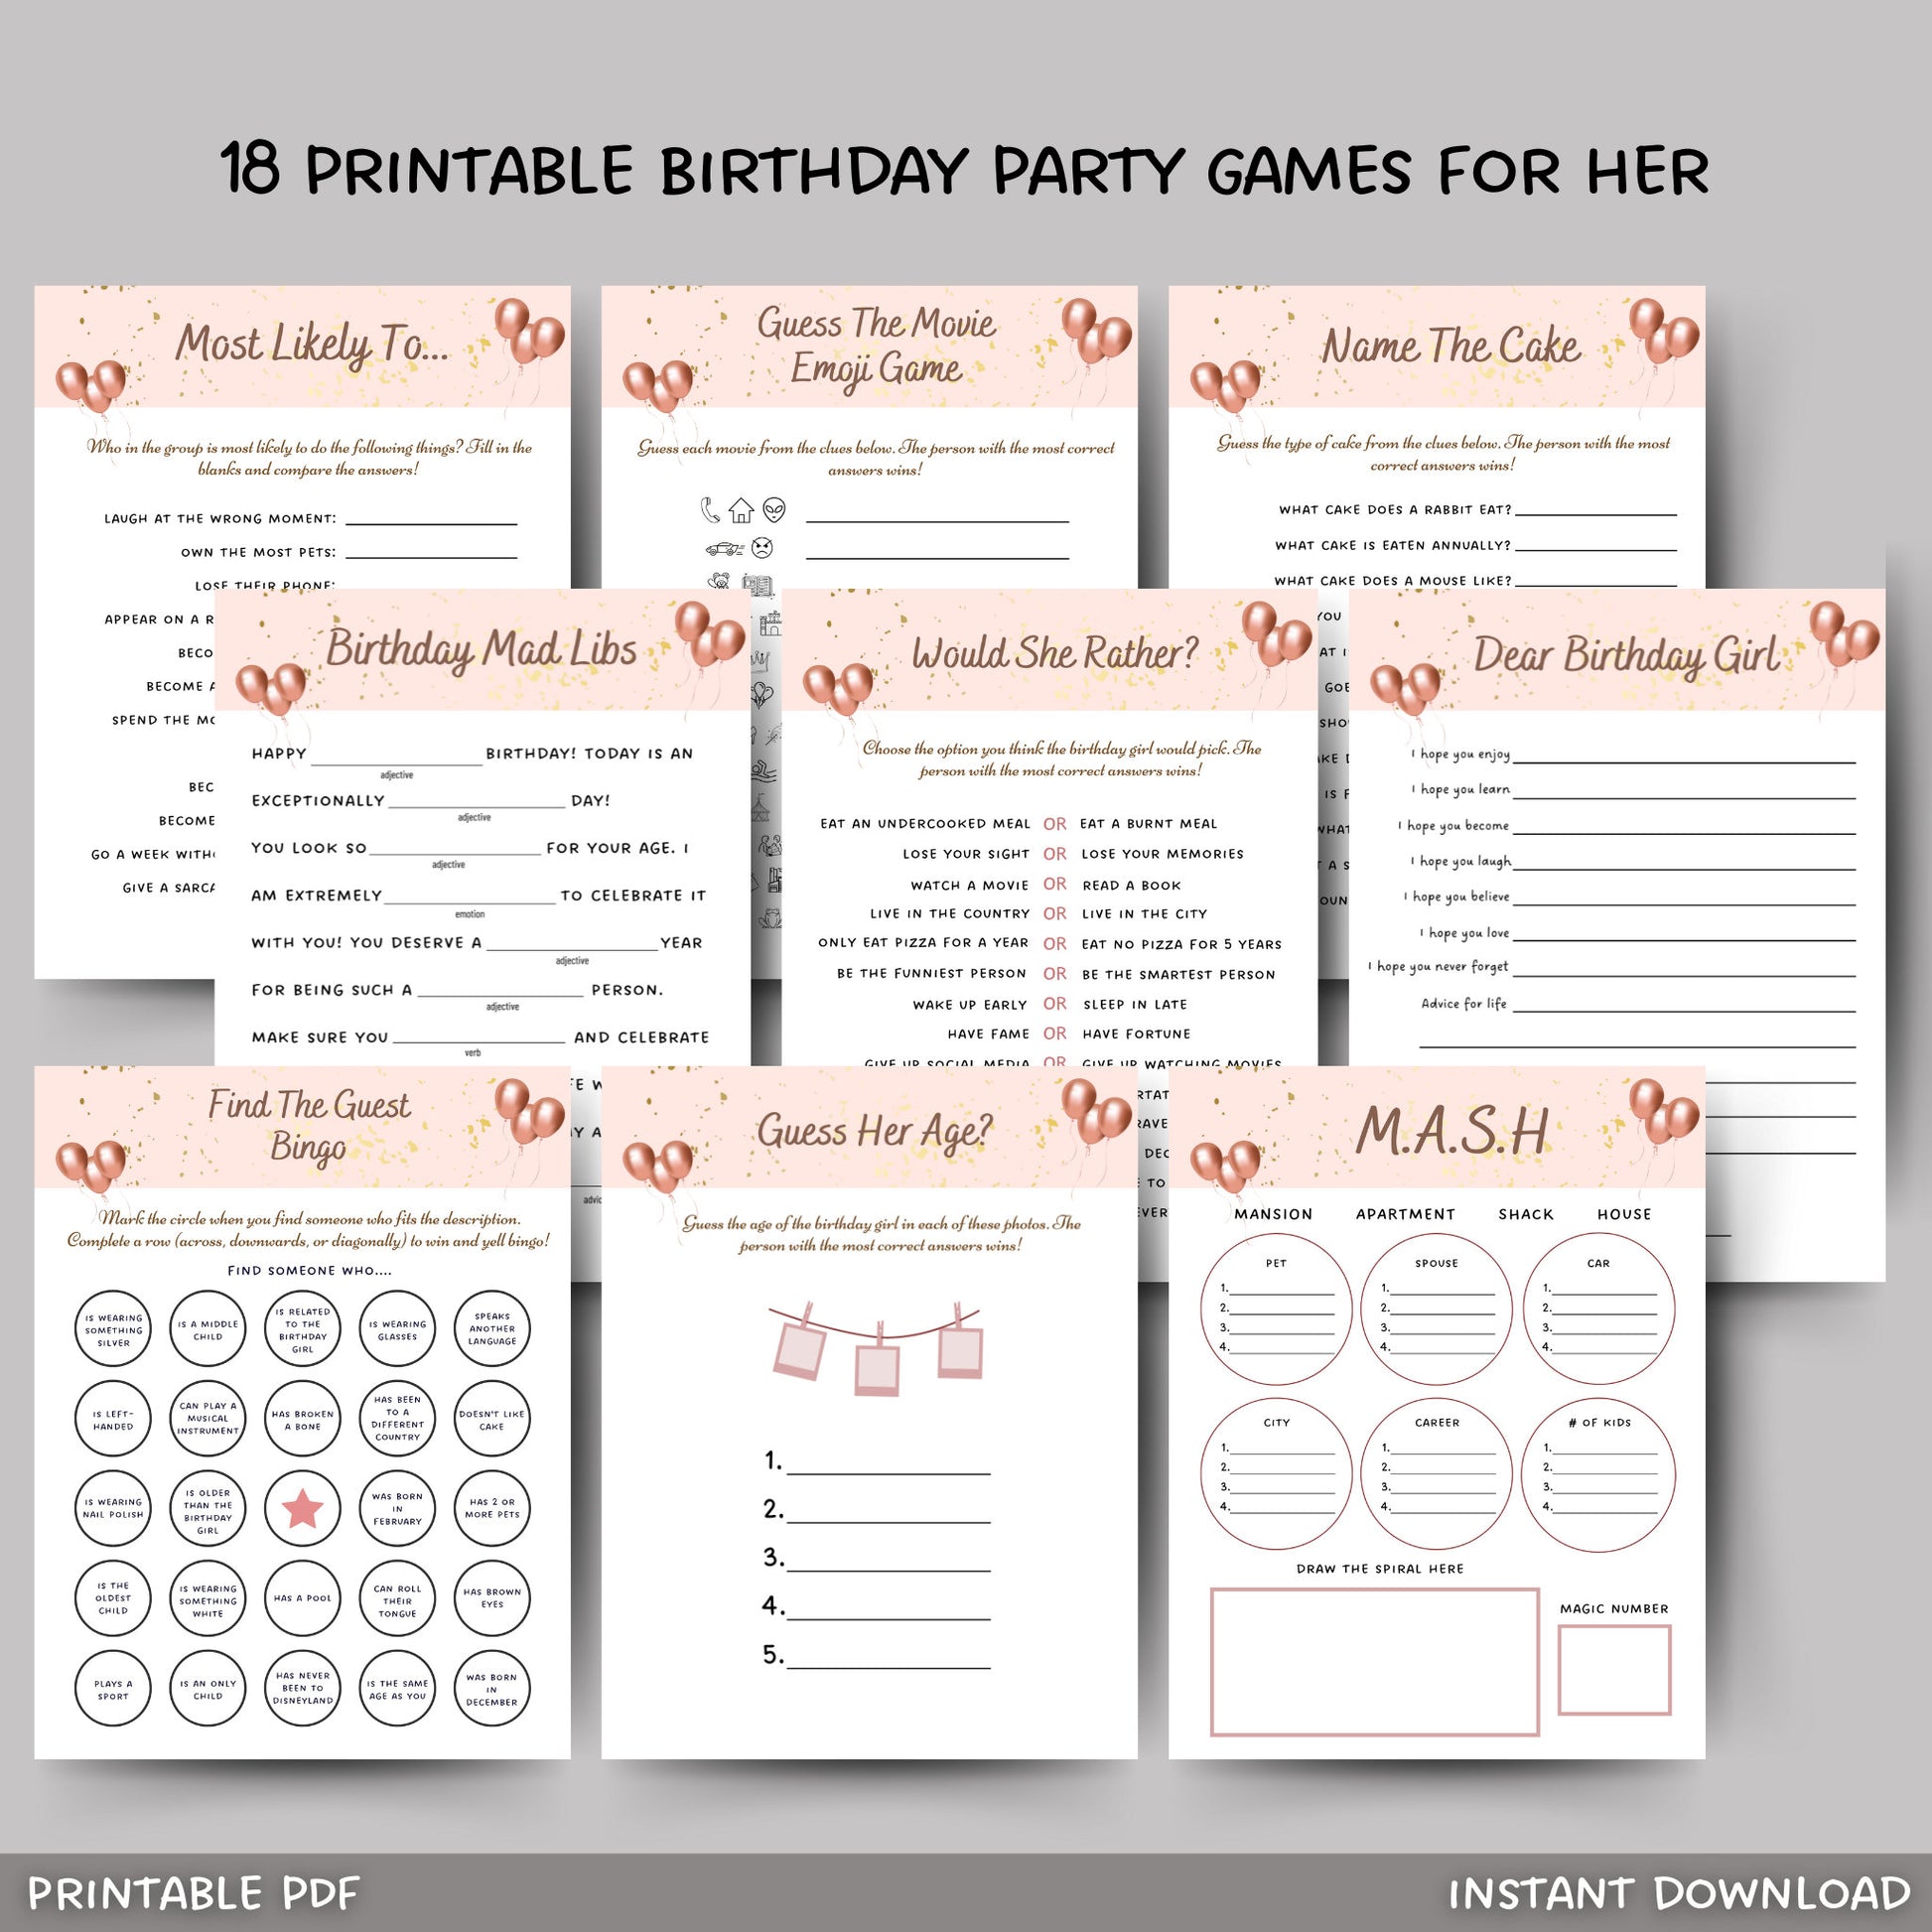 Teen Birthday Party Games Bundle, Birthday Games for Her Printable, Slumber Party Games, Sleepover Pajama Party Activities, 18 Trivia Games